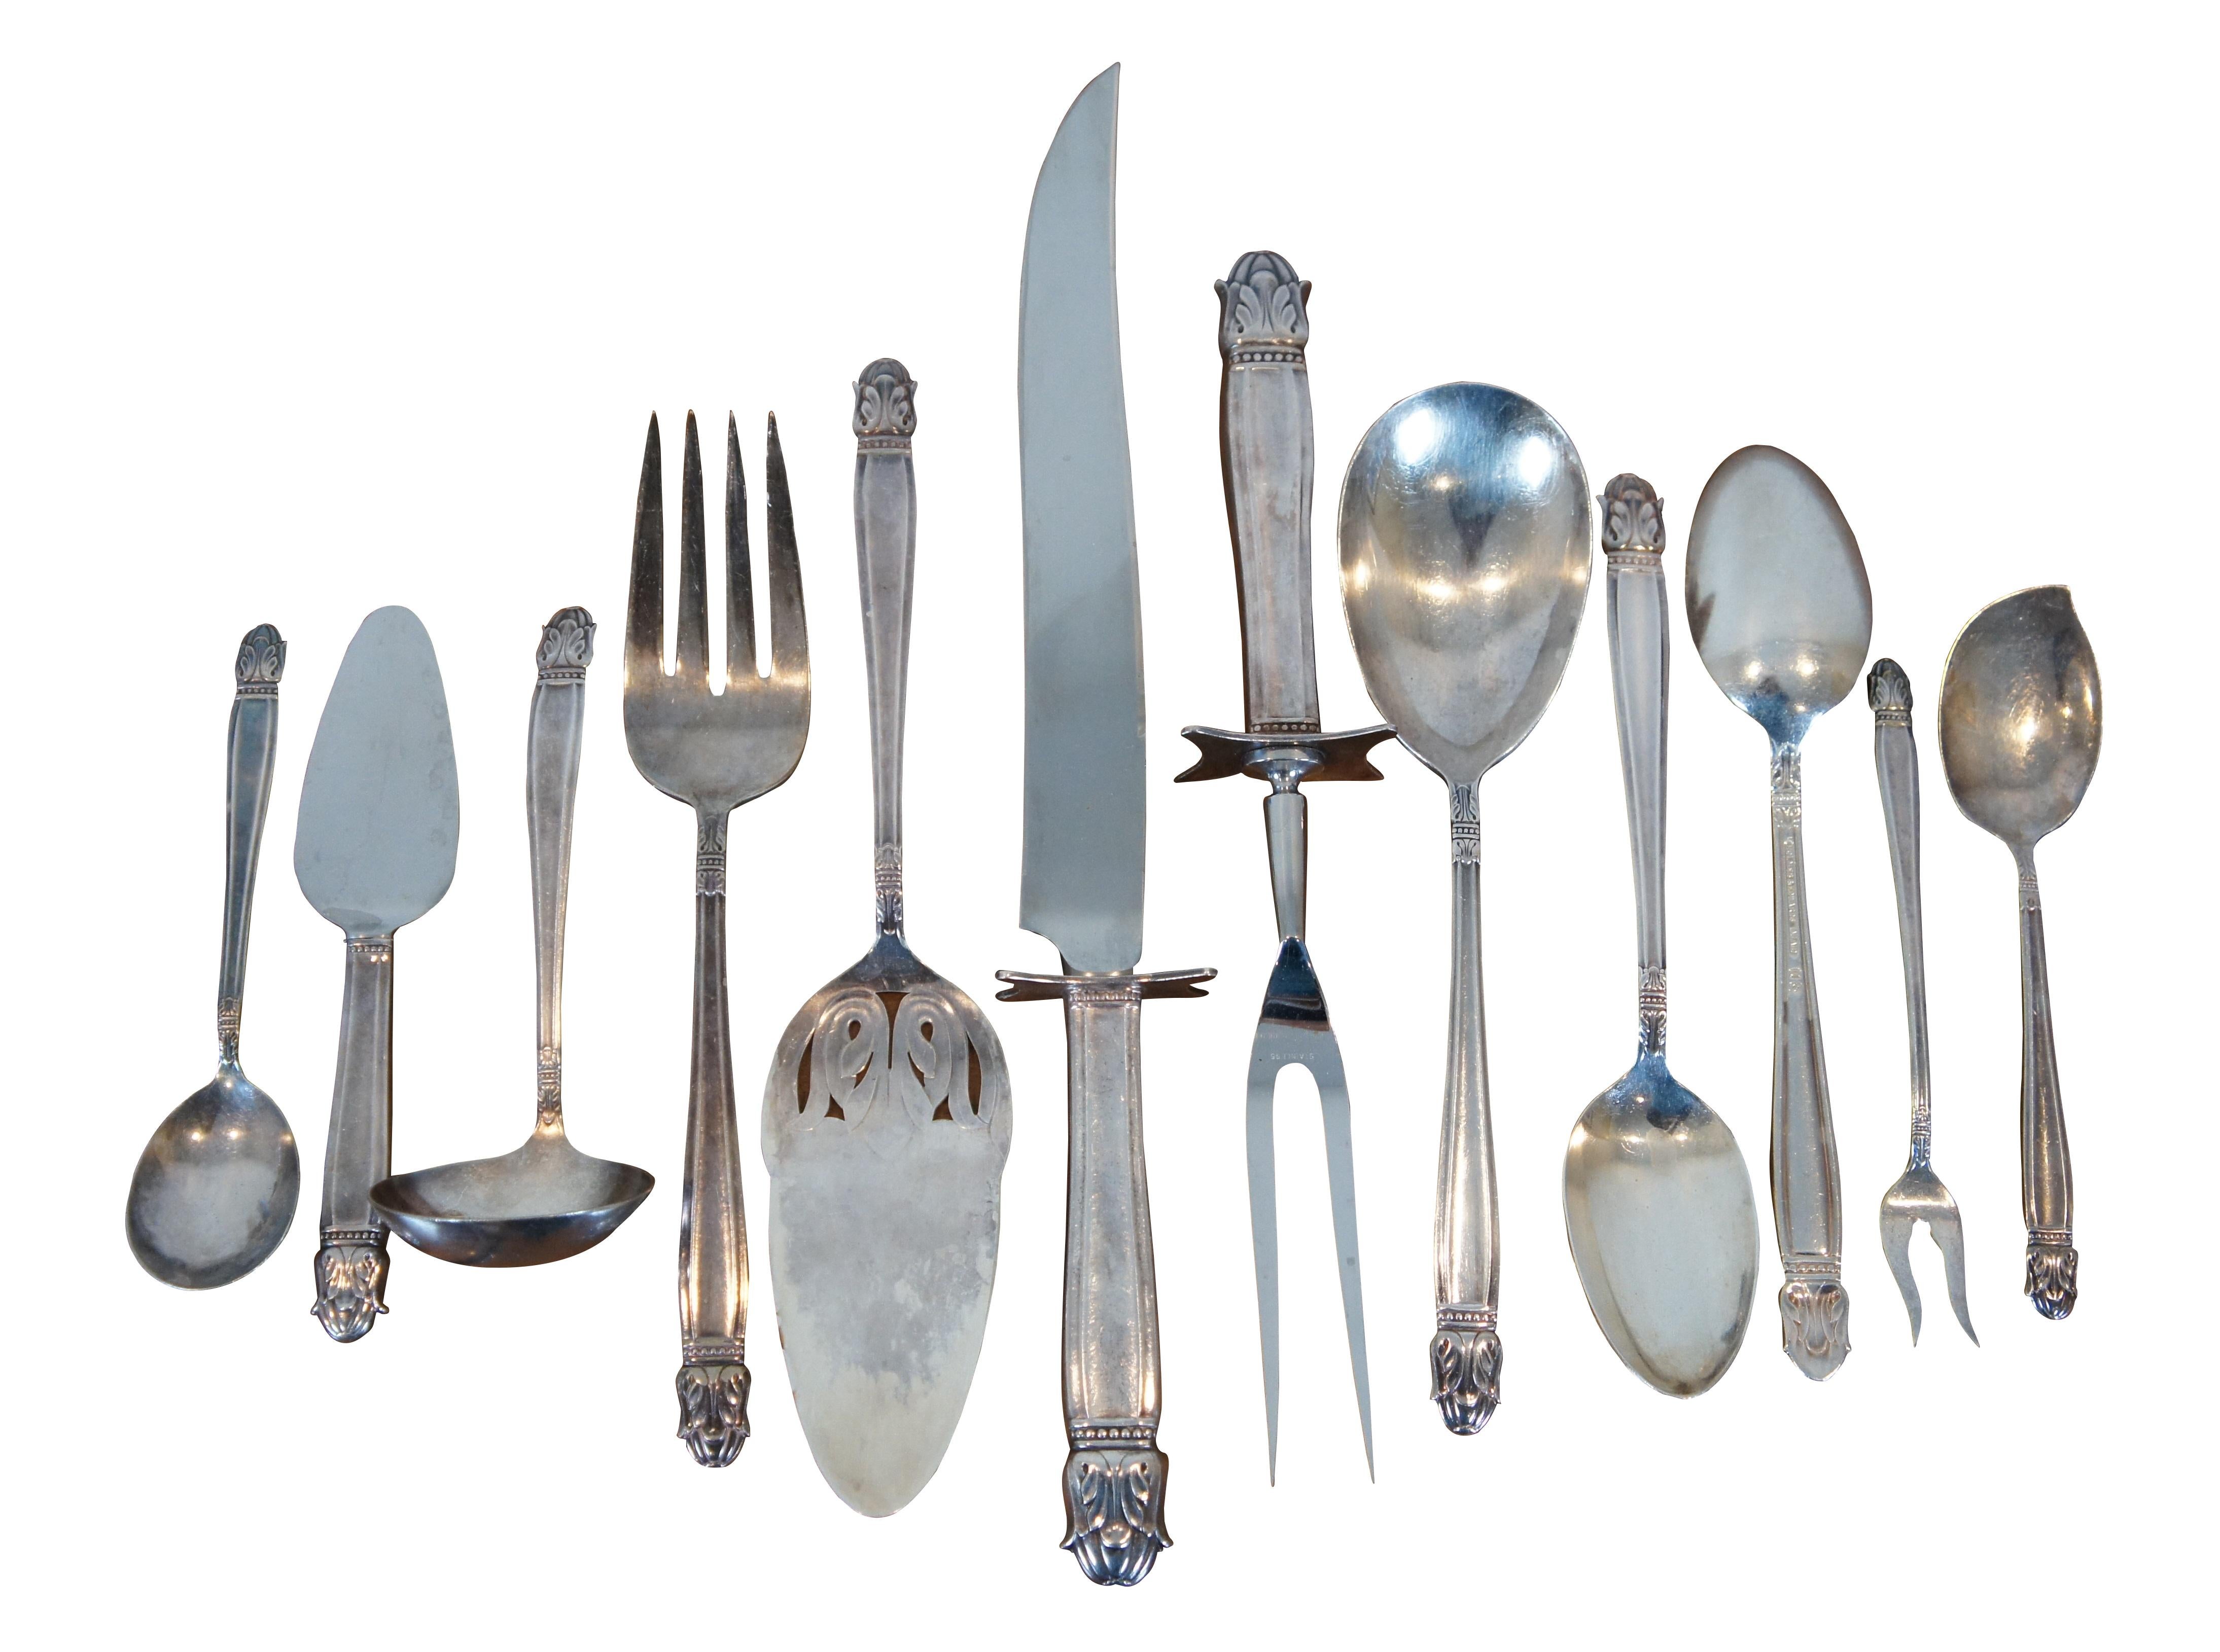 Pattern: Danish Princess, first introduced 1938. This vintage set includes: Carving knife & fork, pie server, casserole spoon, serving fork, 2 serving spoons, gravy ladle, berry spoon, cheese spreader, sugar spoon, shrimp fork, 12 table forks, 12